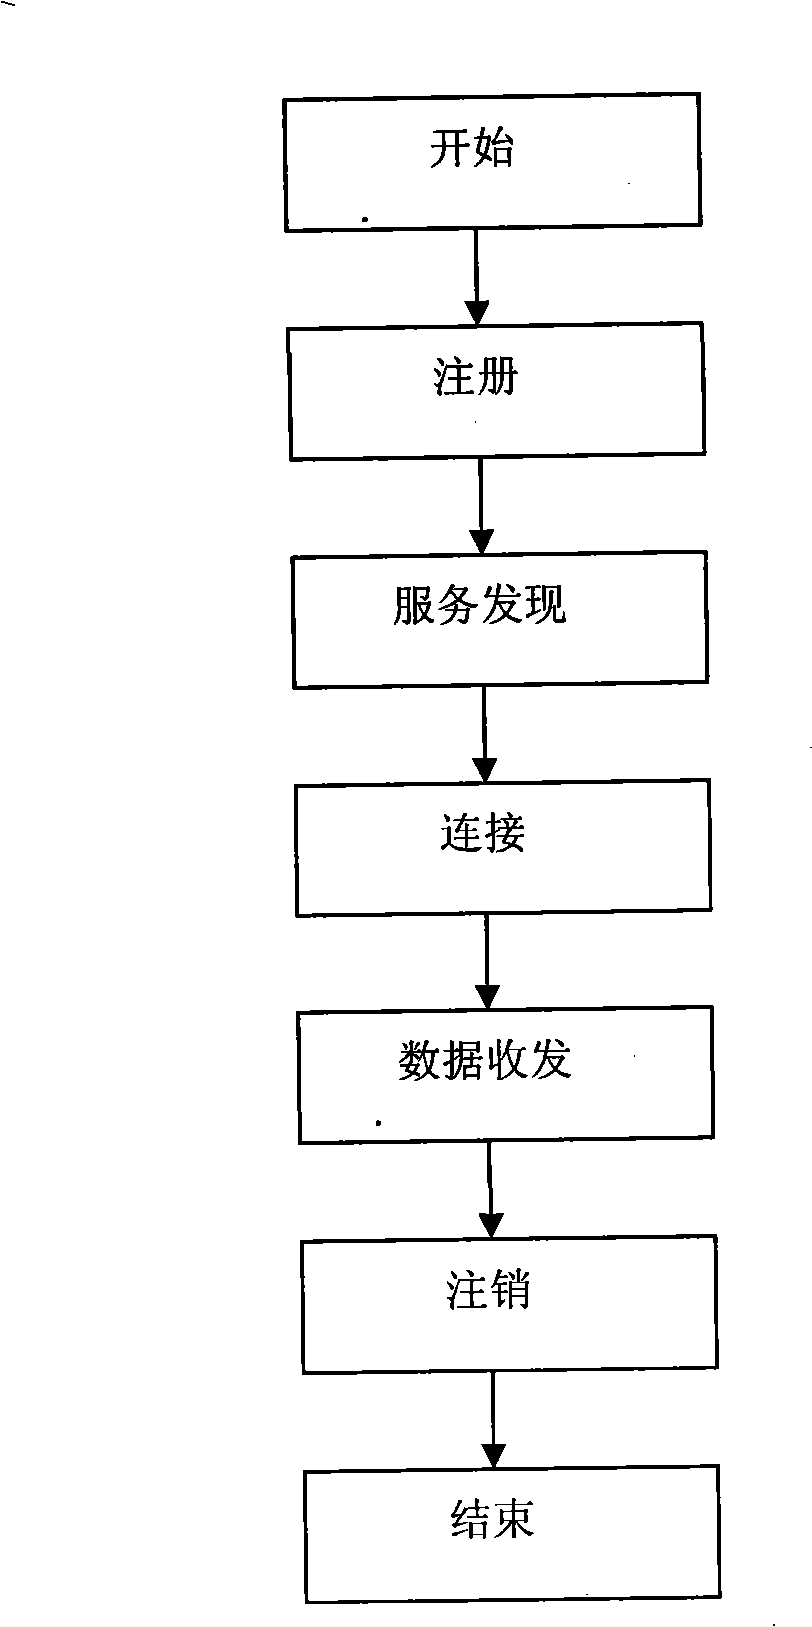 Bluetooth mobile phone and CMMB/Bluetooth gateway cooperated mobile phone television receiving method and system